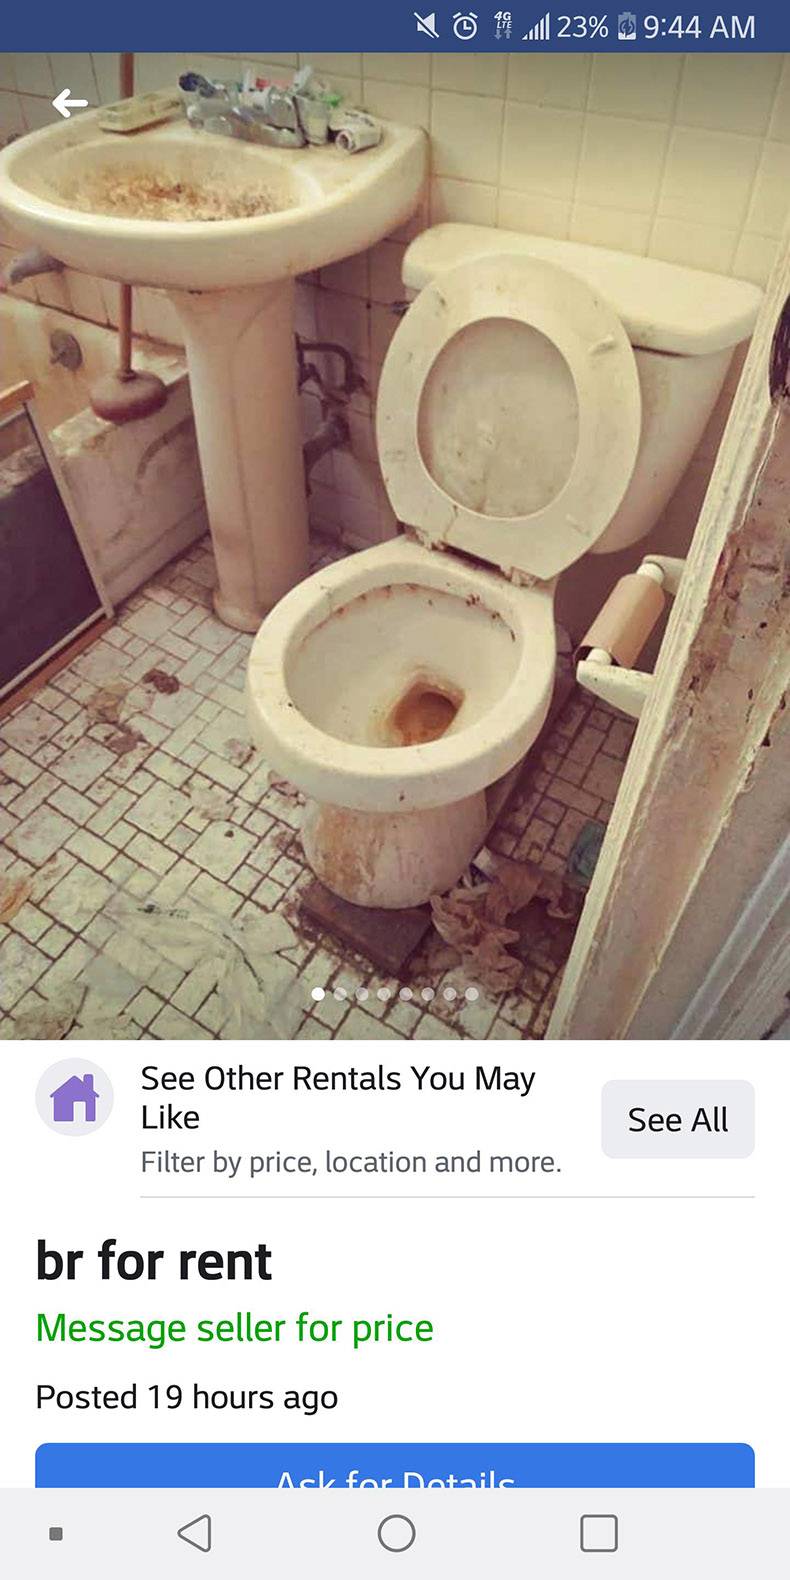 toilet seat - 19_23% See Other Rentals You May Filter by price, location and more. See All br for rent Message seller for price Posted 19 hours ago Acl,for Details . 0 0 0